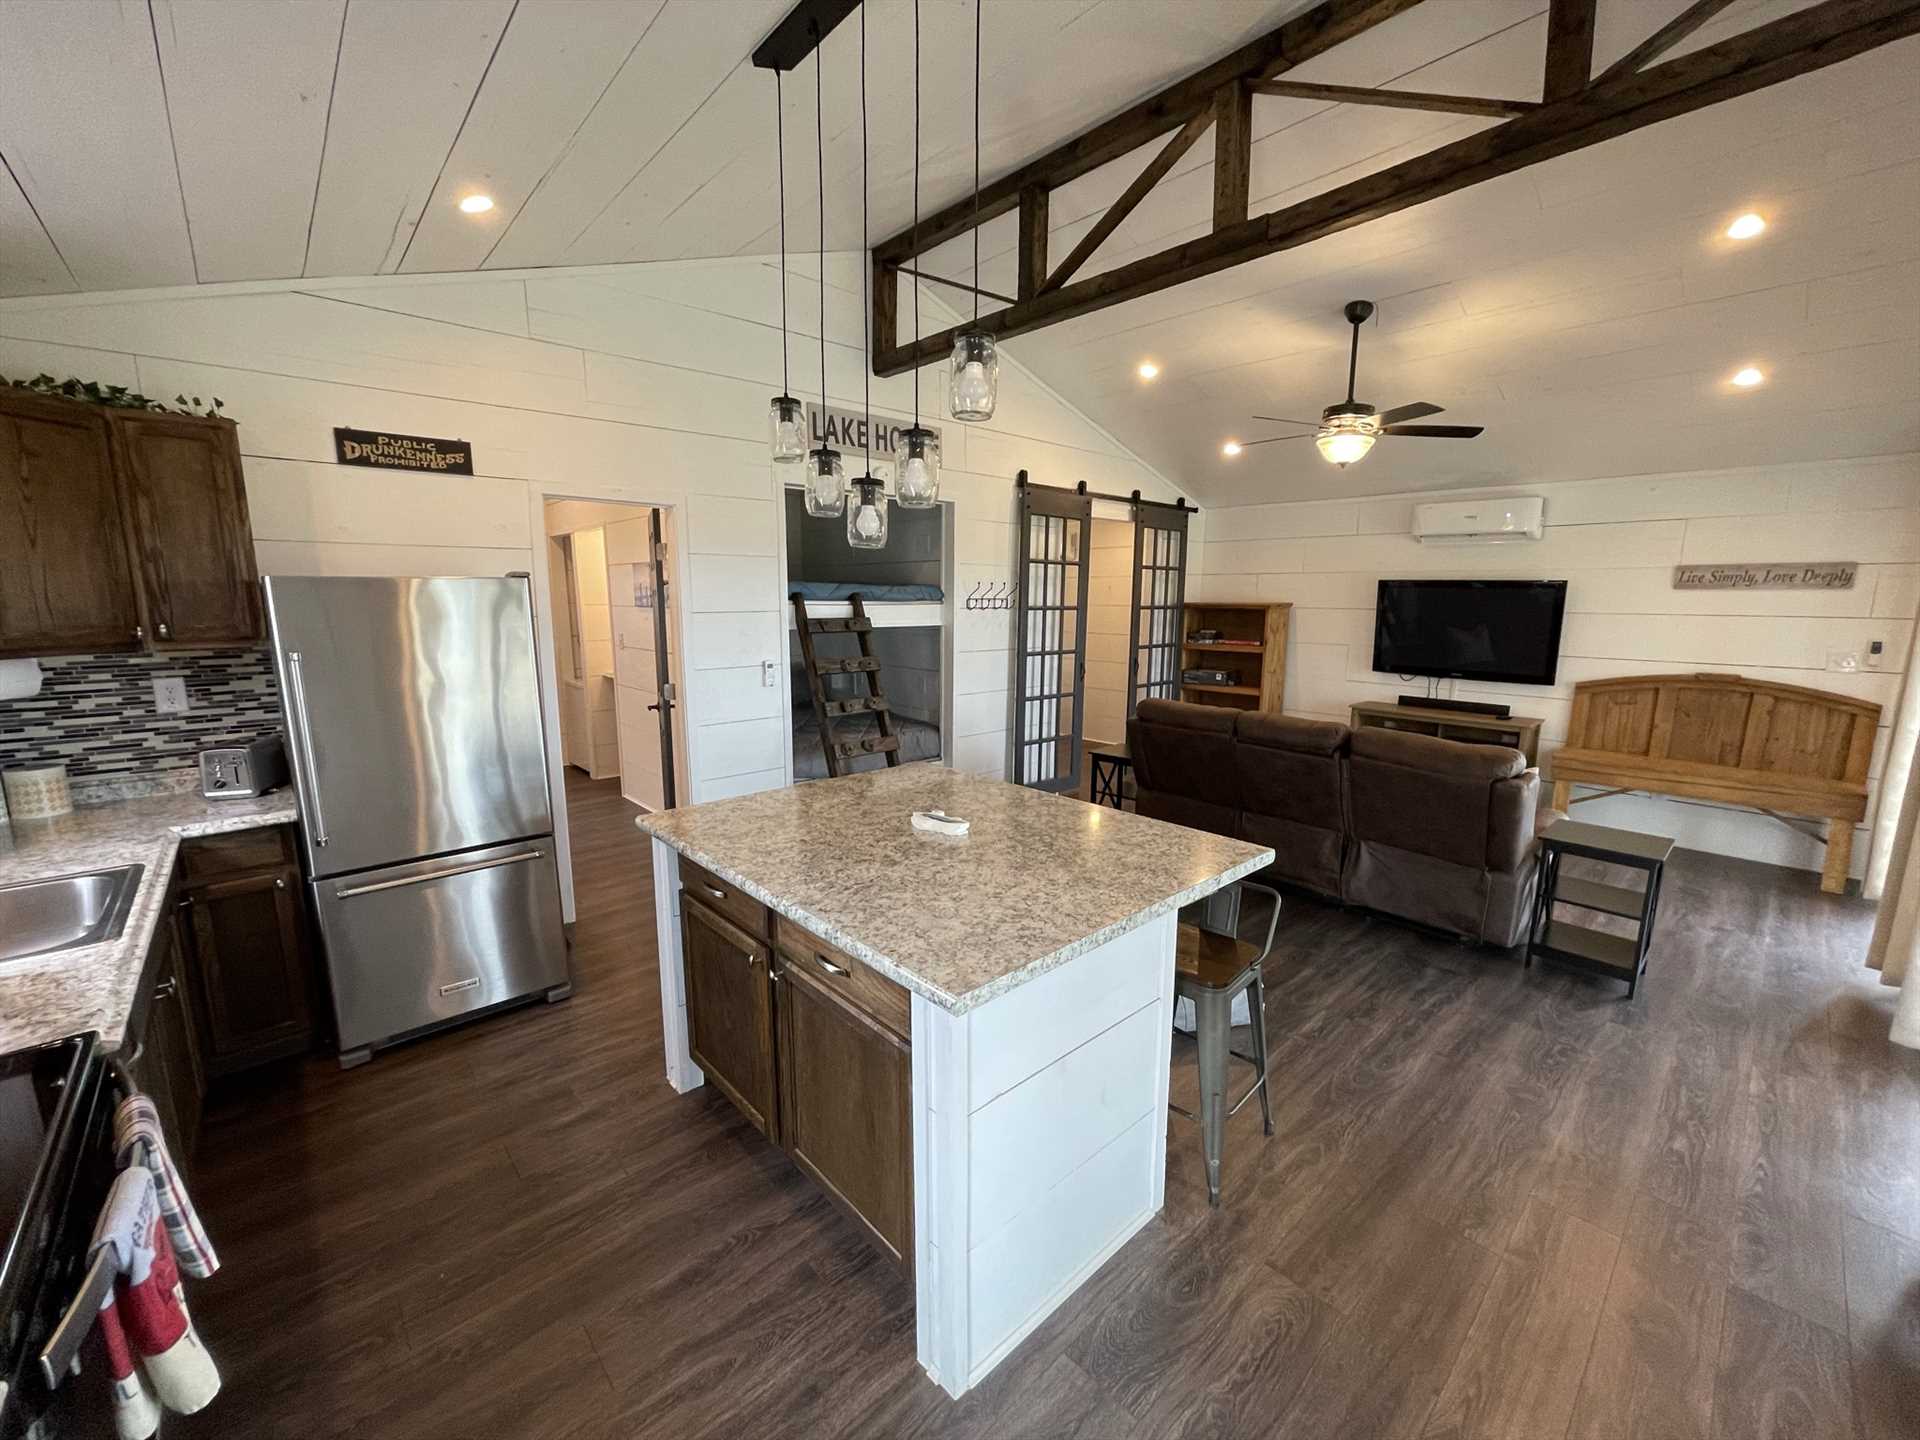                                                 A wide-open floor plan allows for conversation and laughter between the kitchen, dining area, and living space!